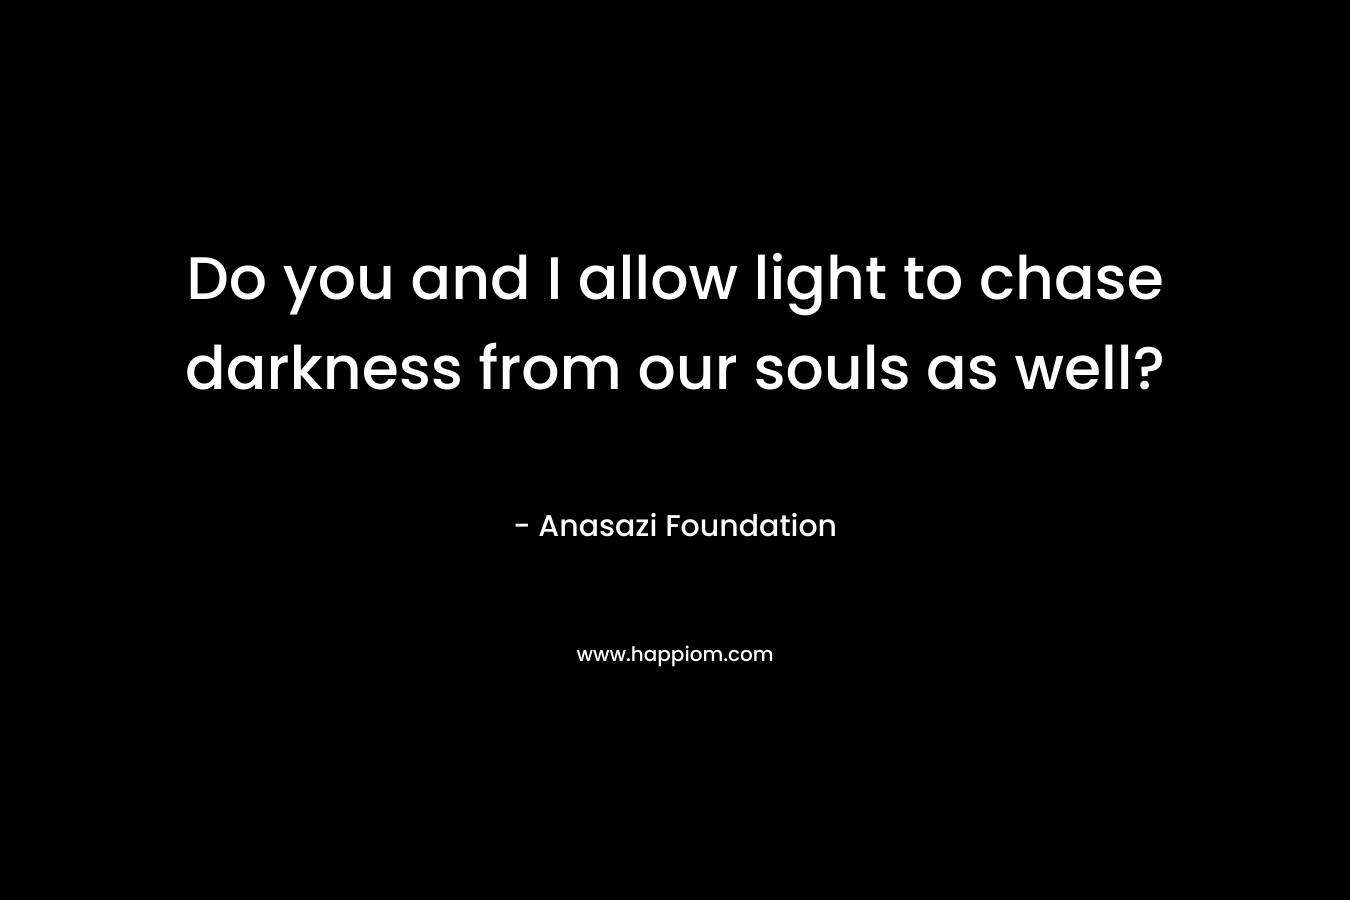 Do you and I allow light to chase darkness from our souls as well? – Anasazi Foundation